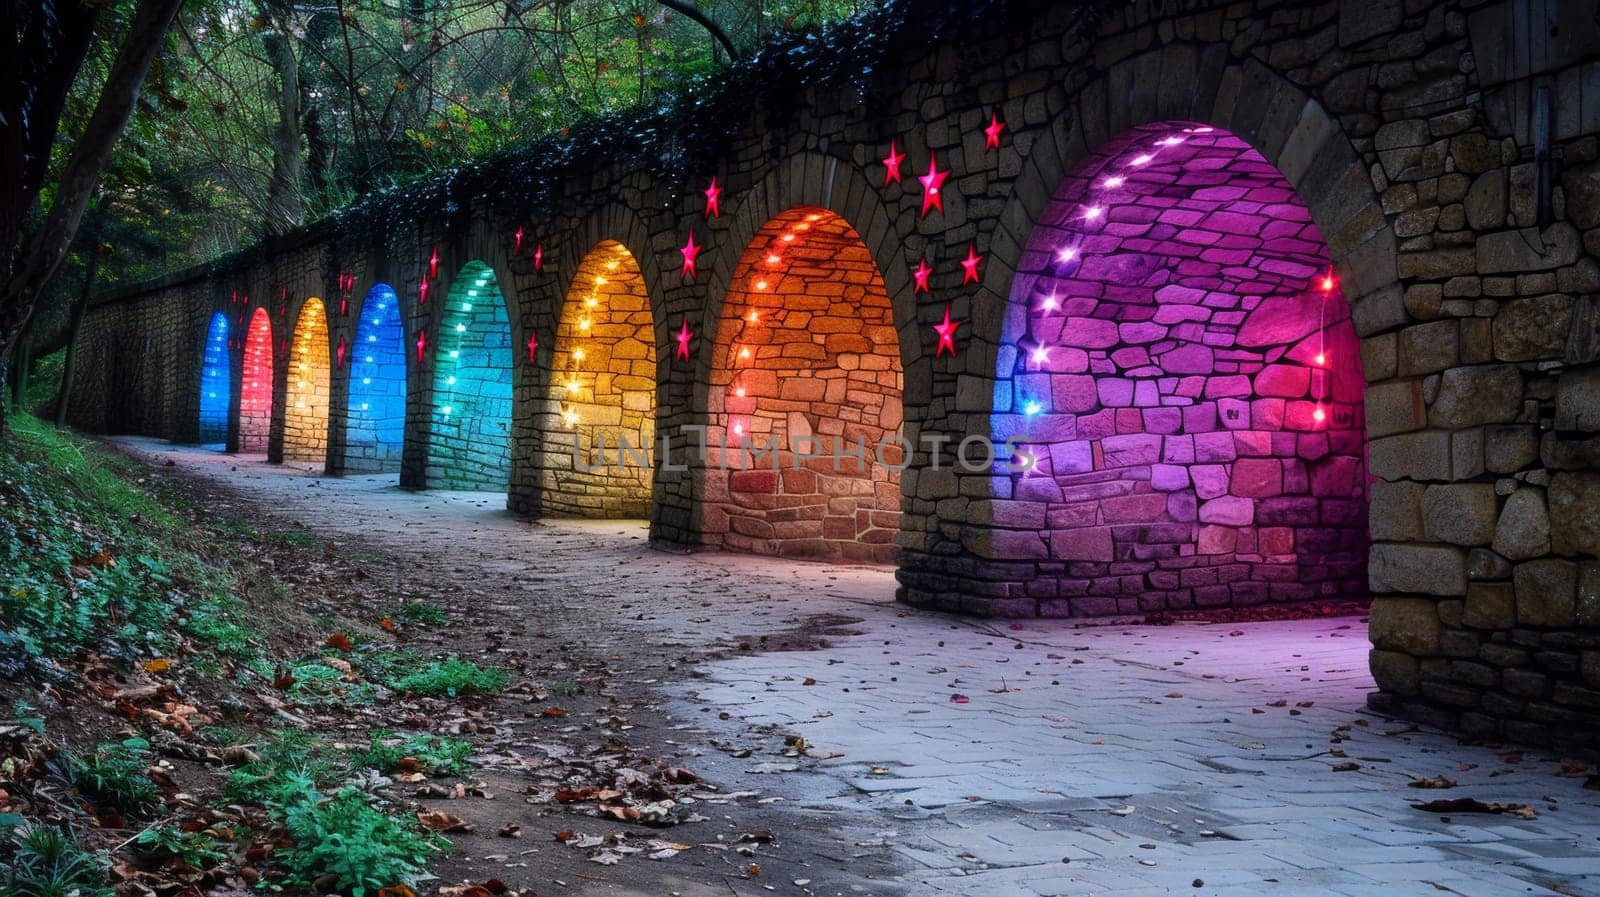 A row of arches with colored lights on them in a park